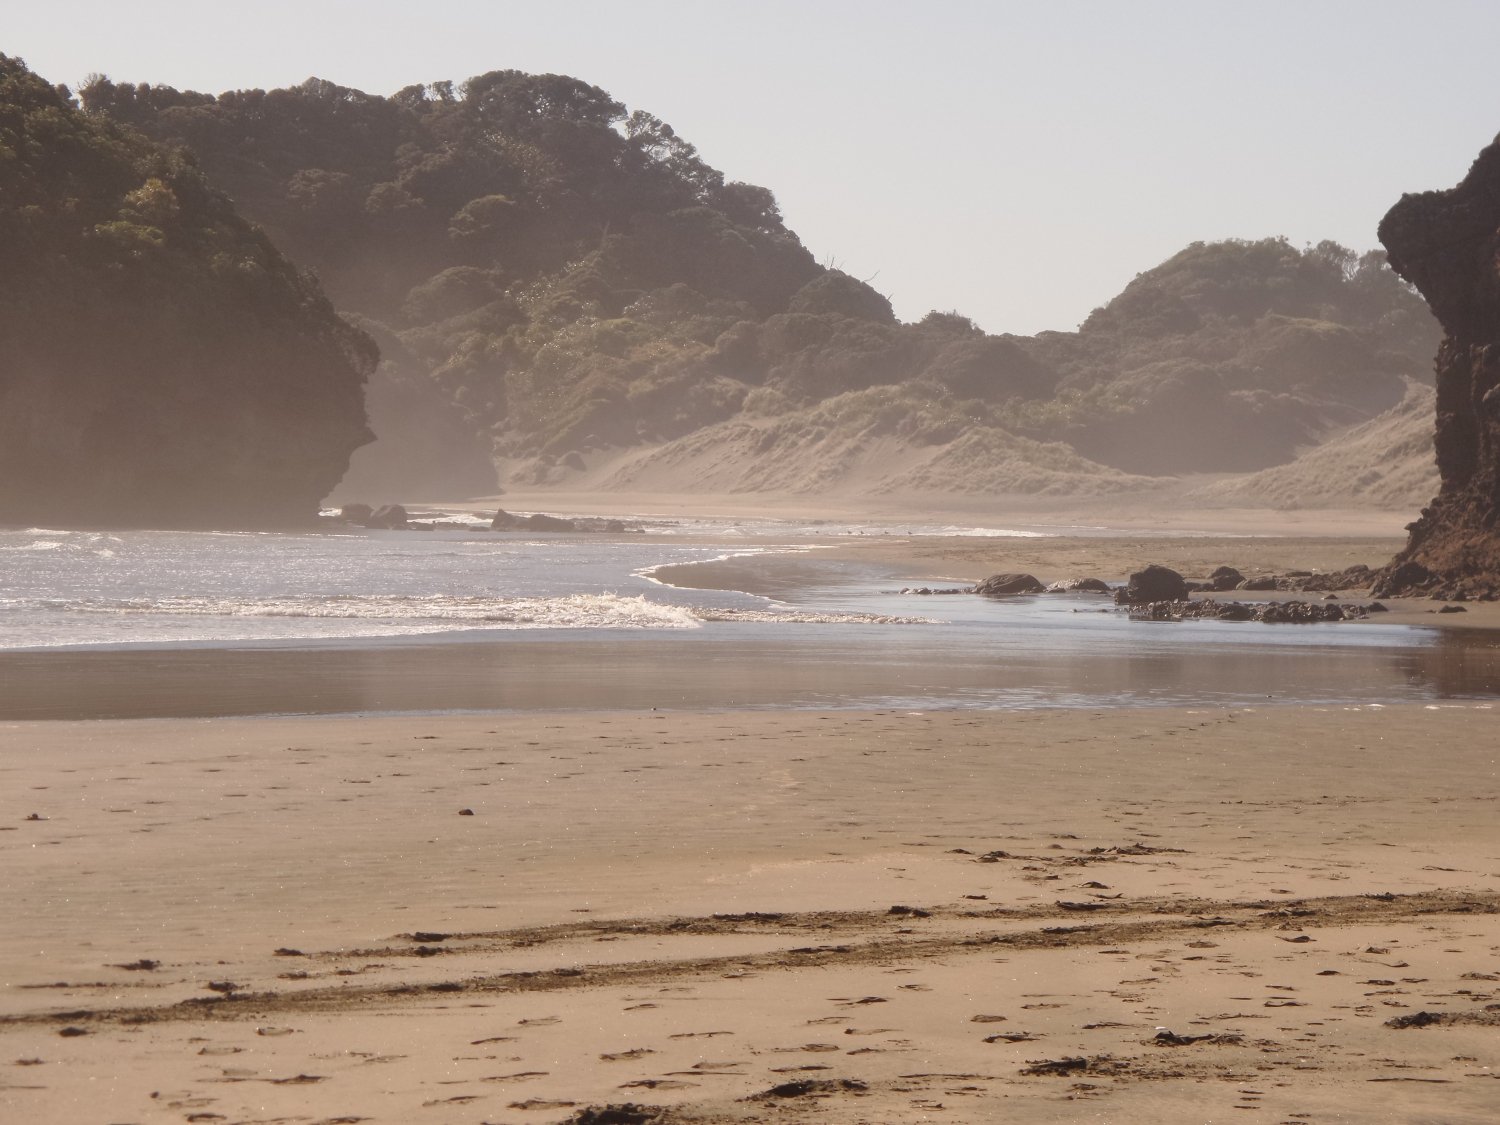 A quick guide to visiting Bethells Beach, West Auckland